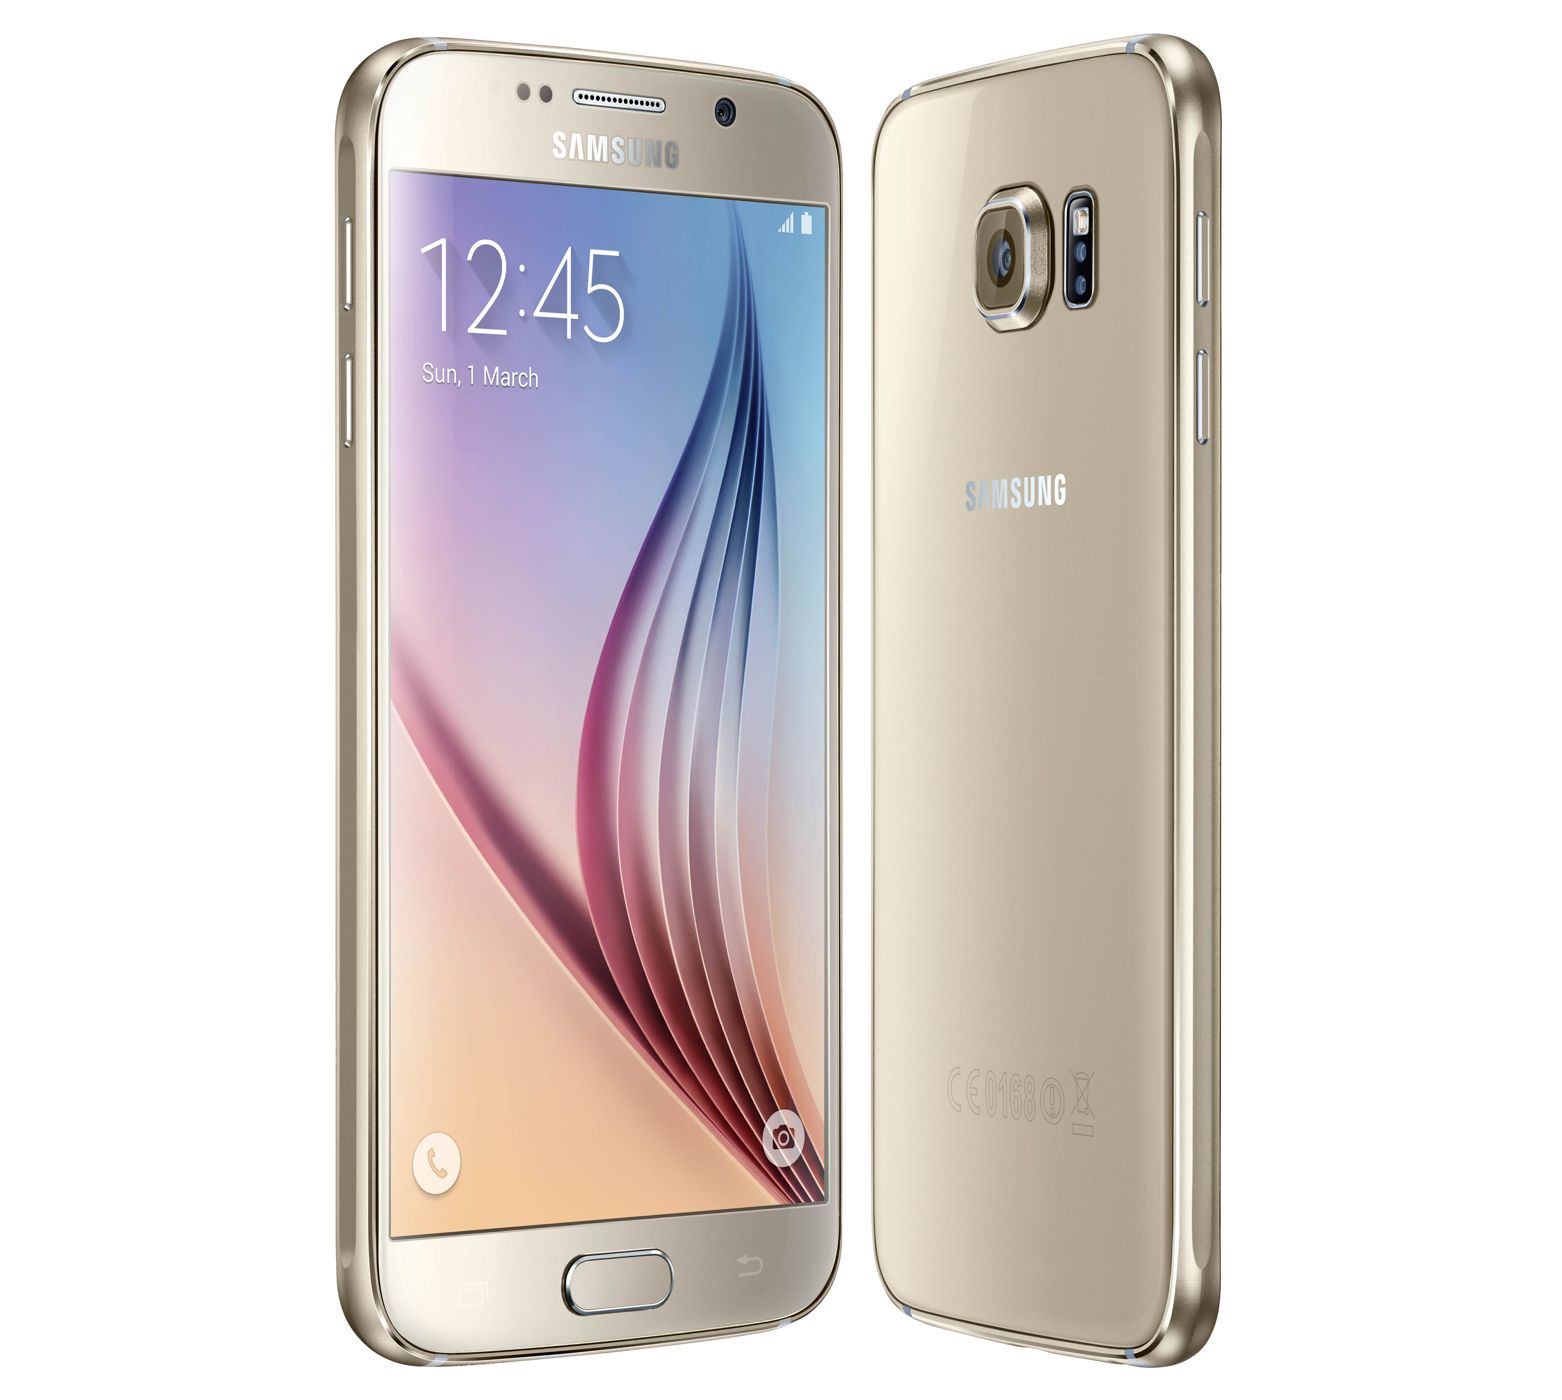 buy Cell Phone Samsung Galaxy S6 SM-G920R4 32GB - Gold - click for details